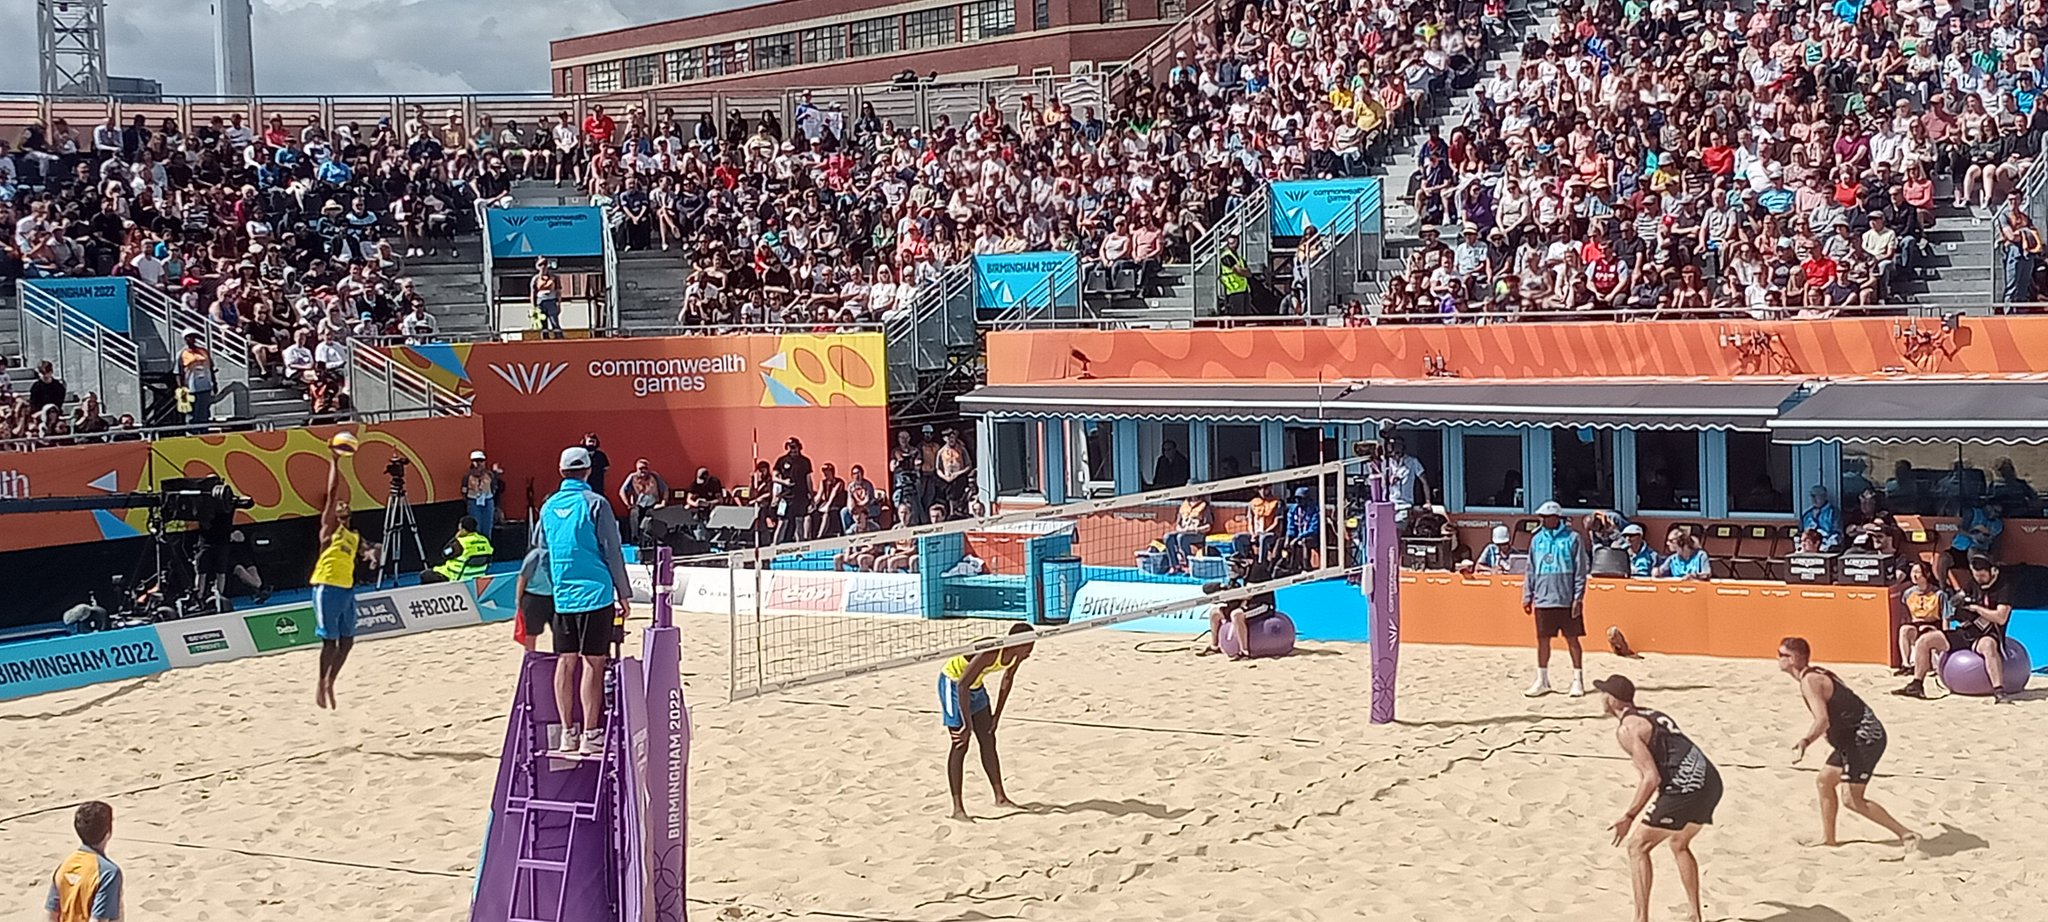 Rwanda for a historic first time, reached the semi-finals in men's beach volleyball at the Commonwealth Games after edging out New Zealand 21-18, 21-19 in Birmingham